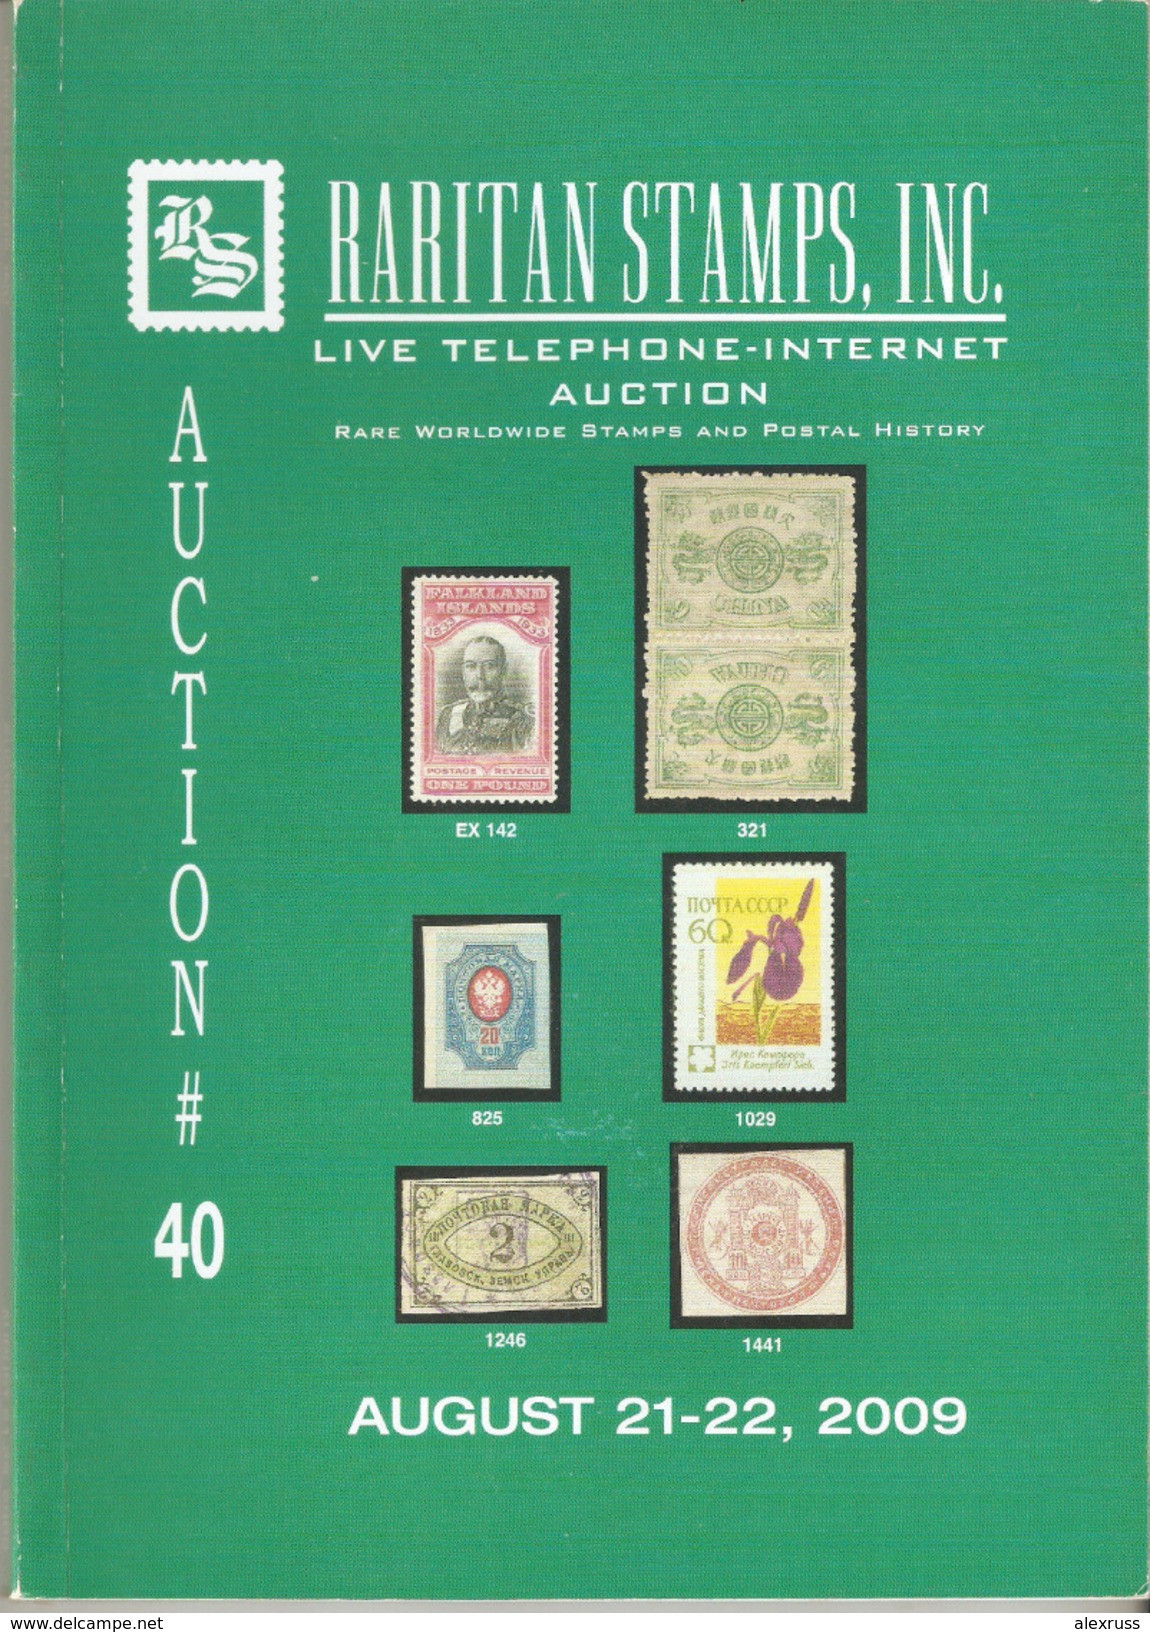 Raritan Stamps Auction 40,Aug 2009 Catalog Of Rare Russia Stamps,Errors & Worldwide Rarities - Catalogues For Auction Houses